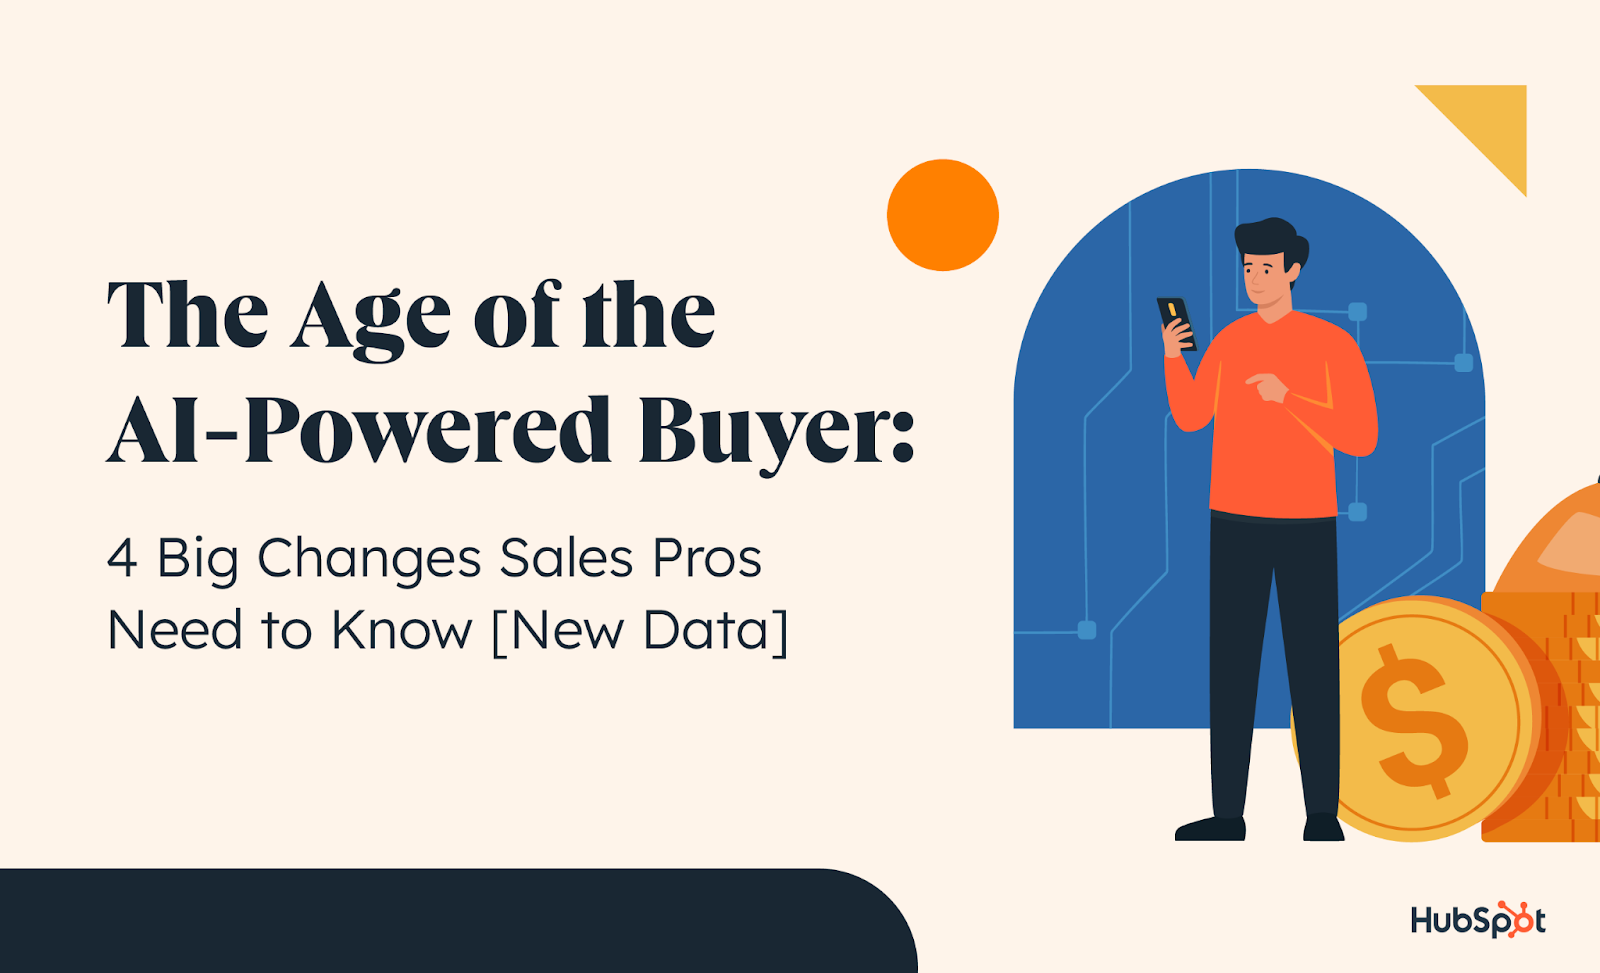 The age of the AI-powered buyer